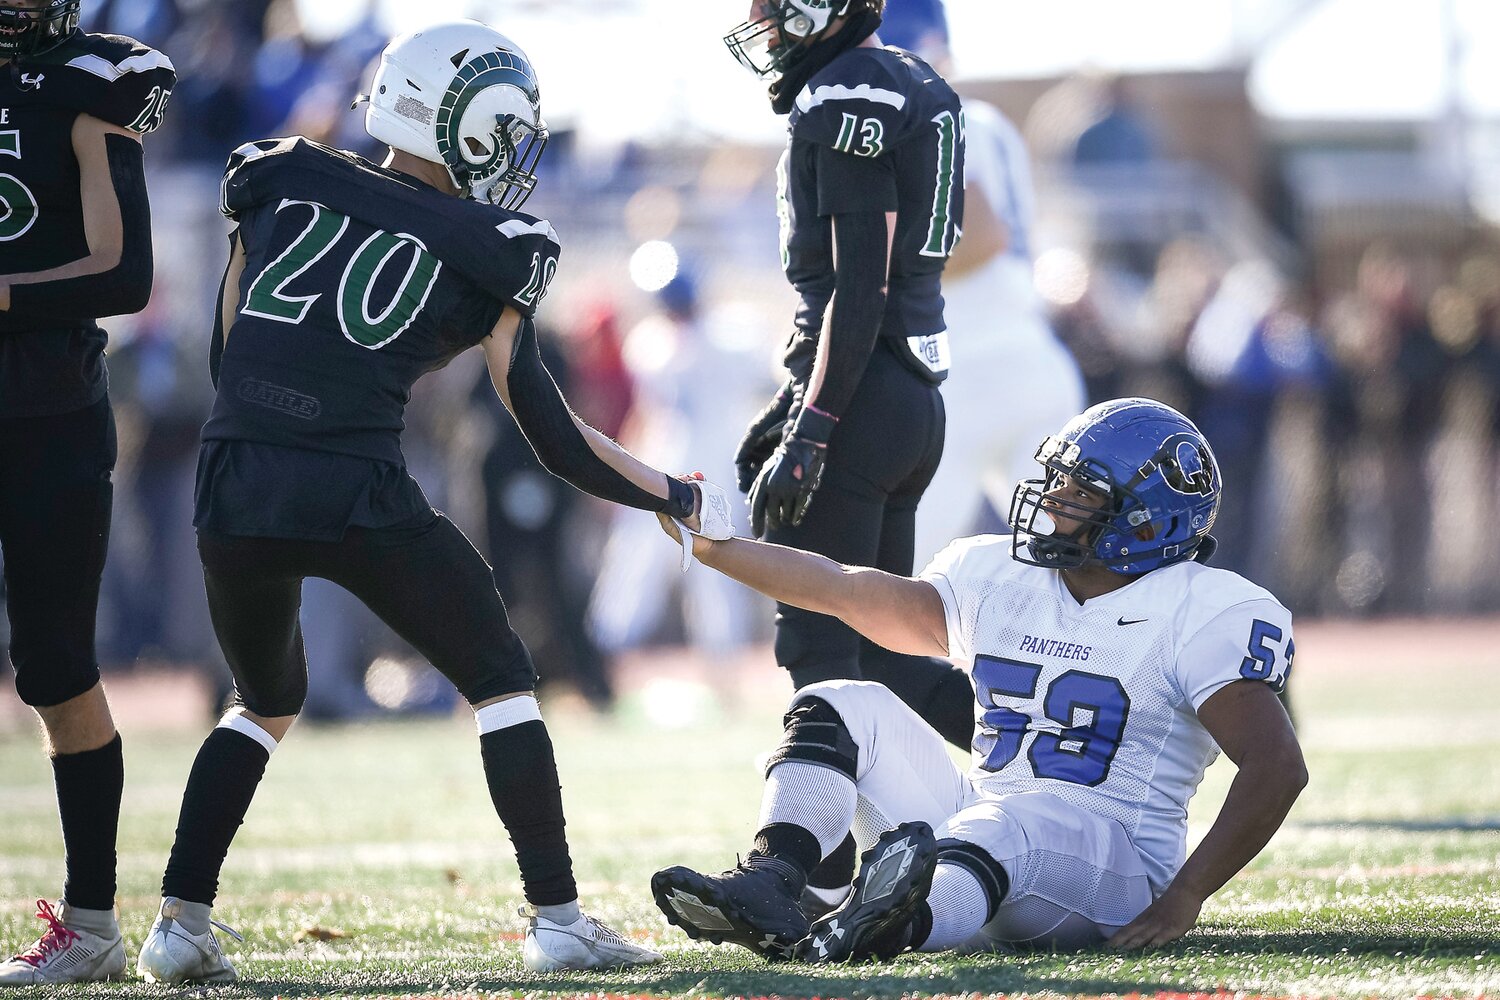 Quakertown’s Keondre Lopez gets a helping hand after a play in the second quarter from Pennridge’s Joe Hamburger.